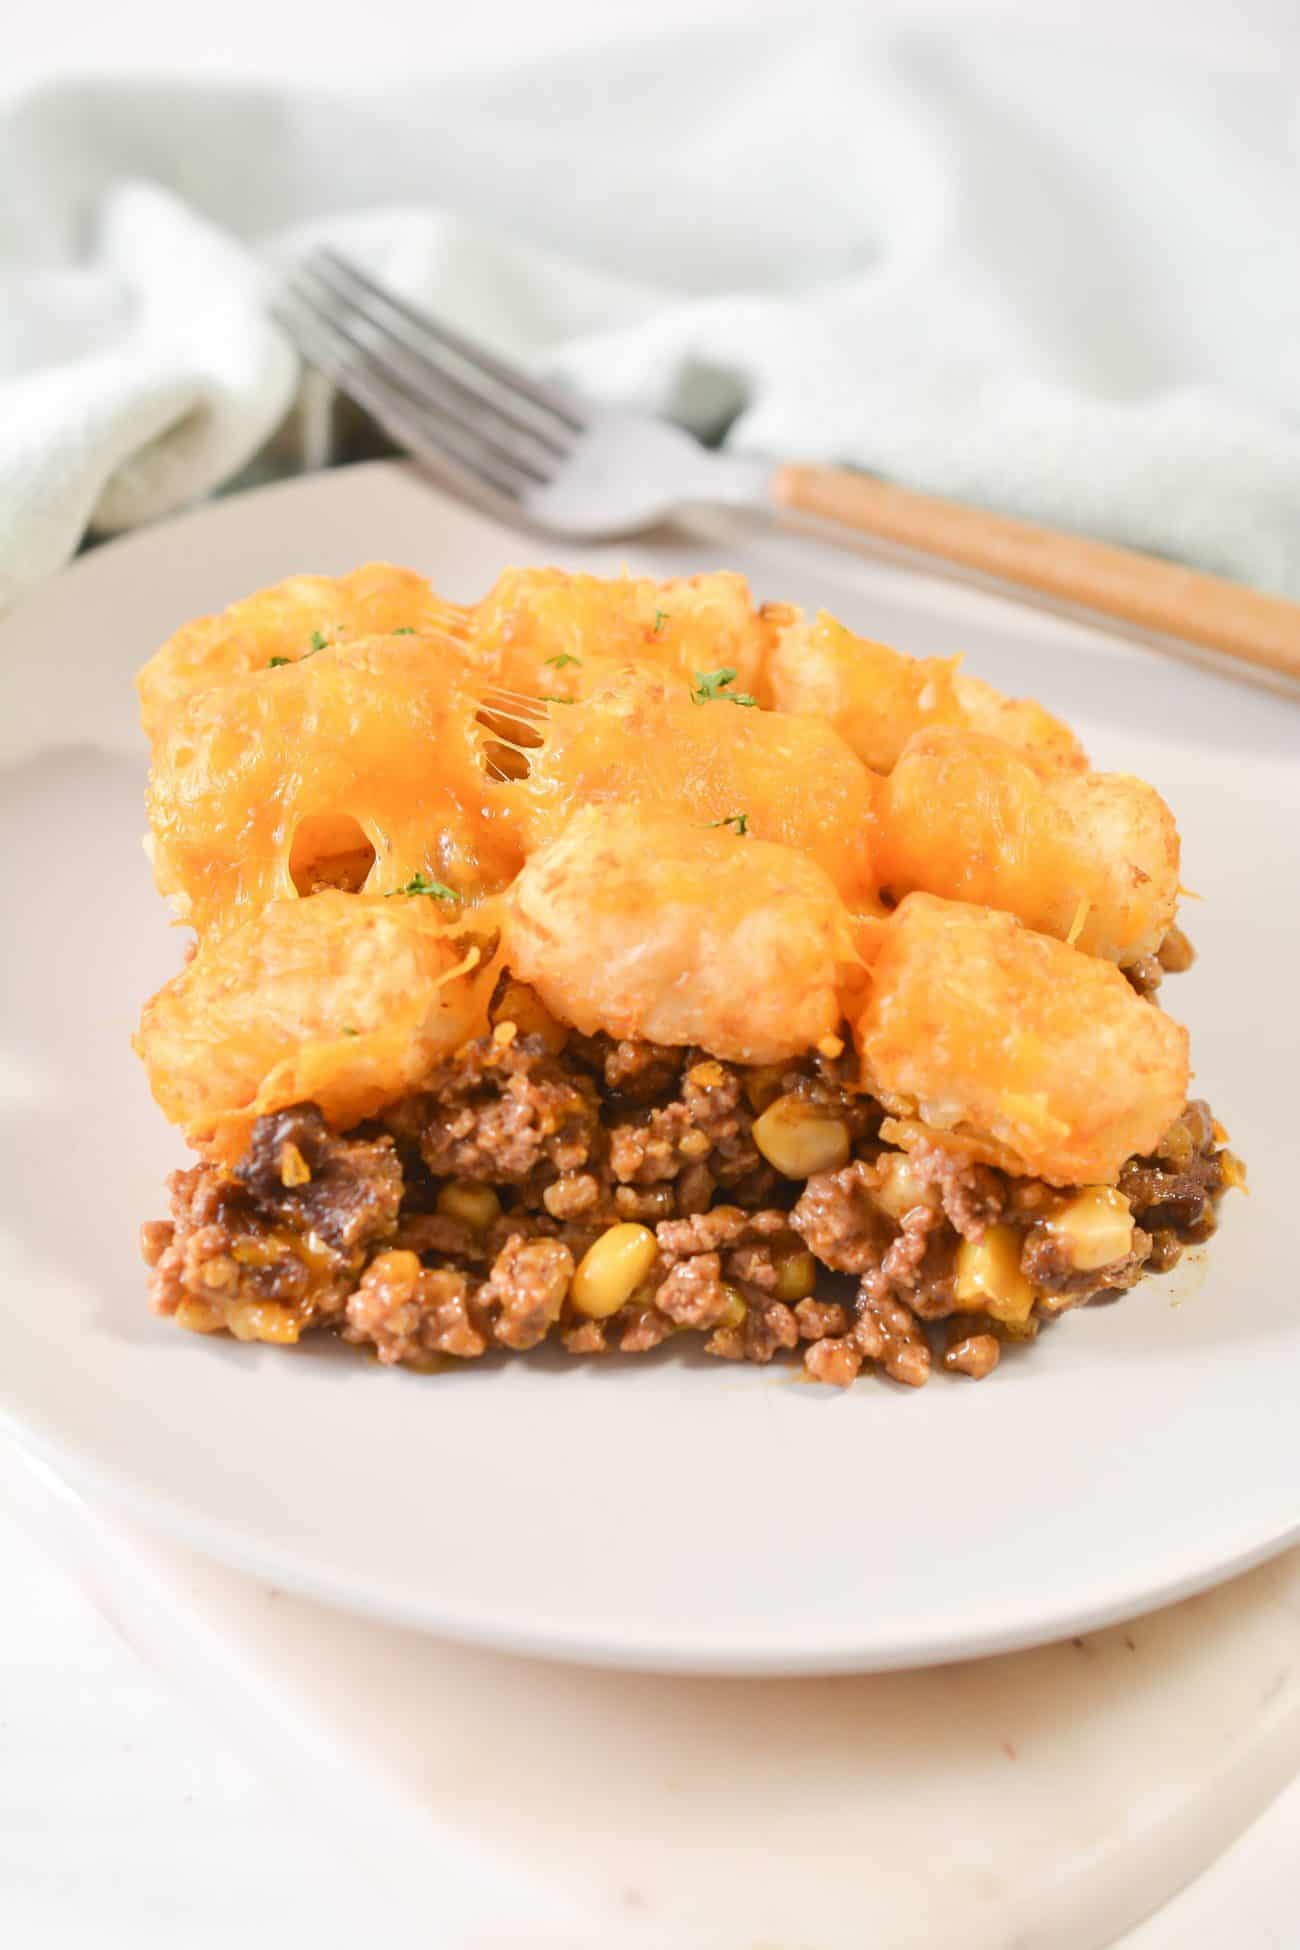 Victory’s Tater Tot Casserole